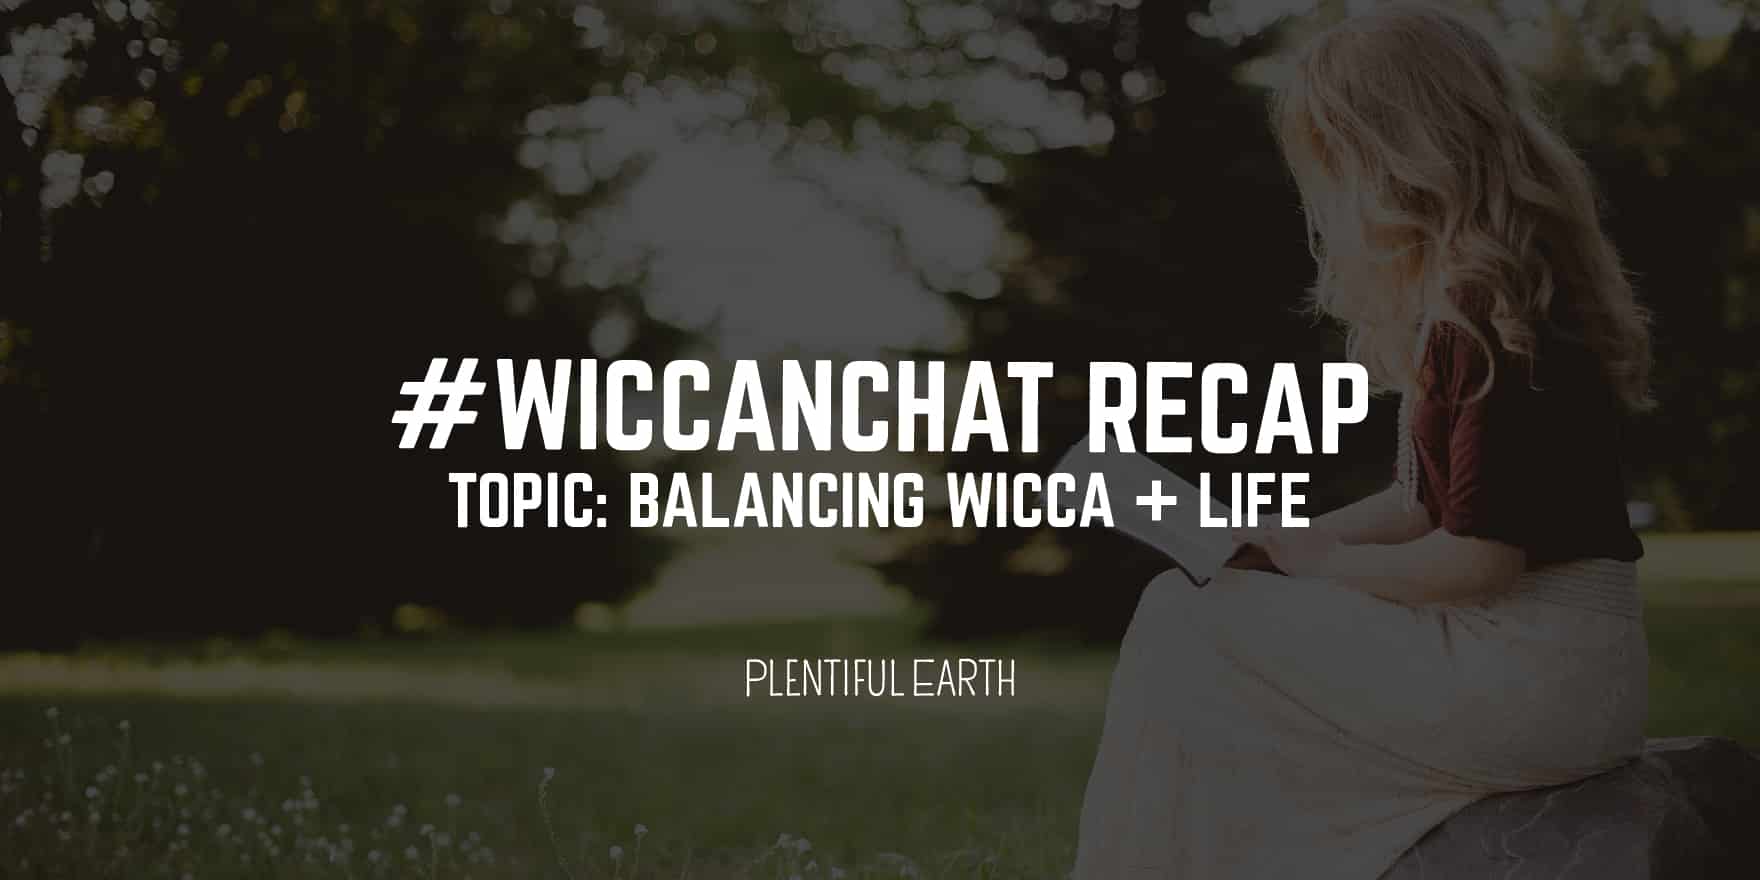 A contemplative moment: exploring the harmony between spirituality and everyday life. #wiccanchat recap on balancing Wicca, metaphysics, and life.